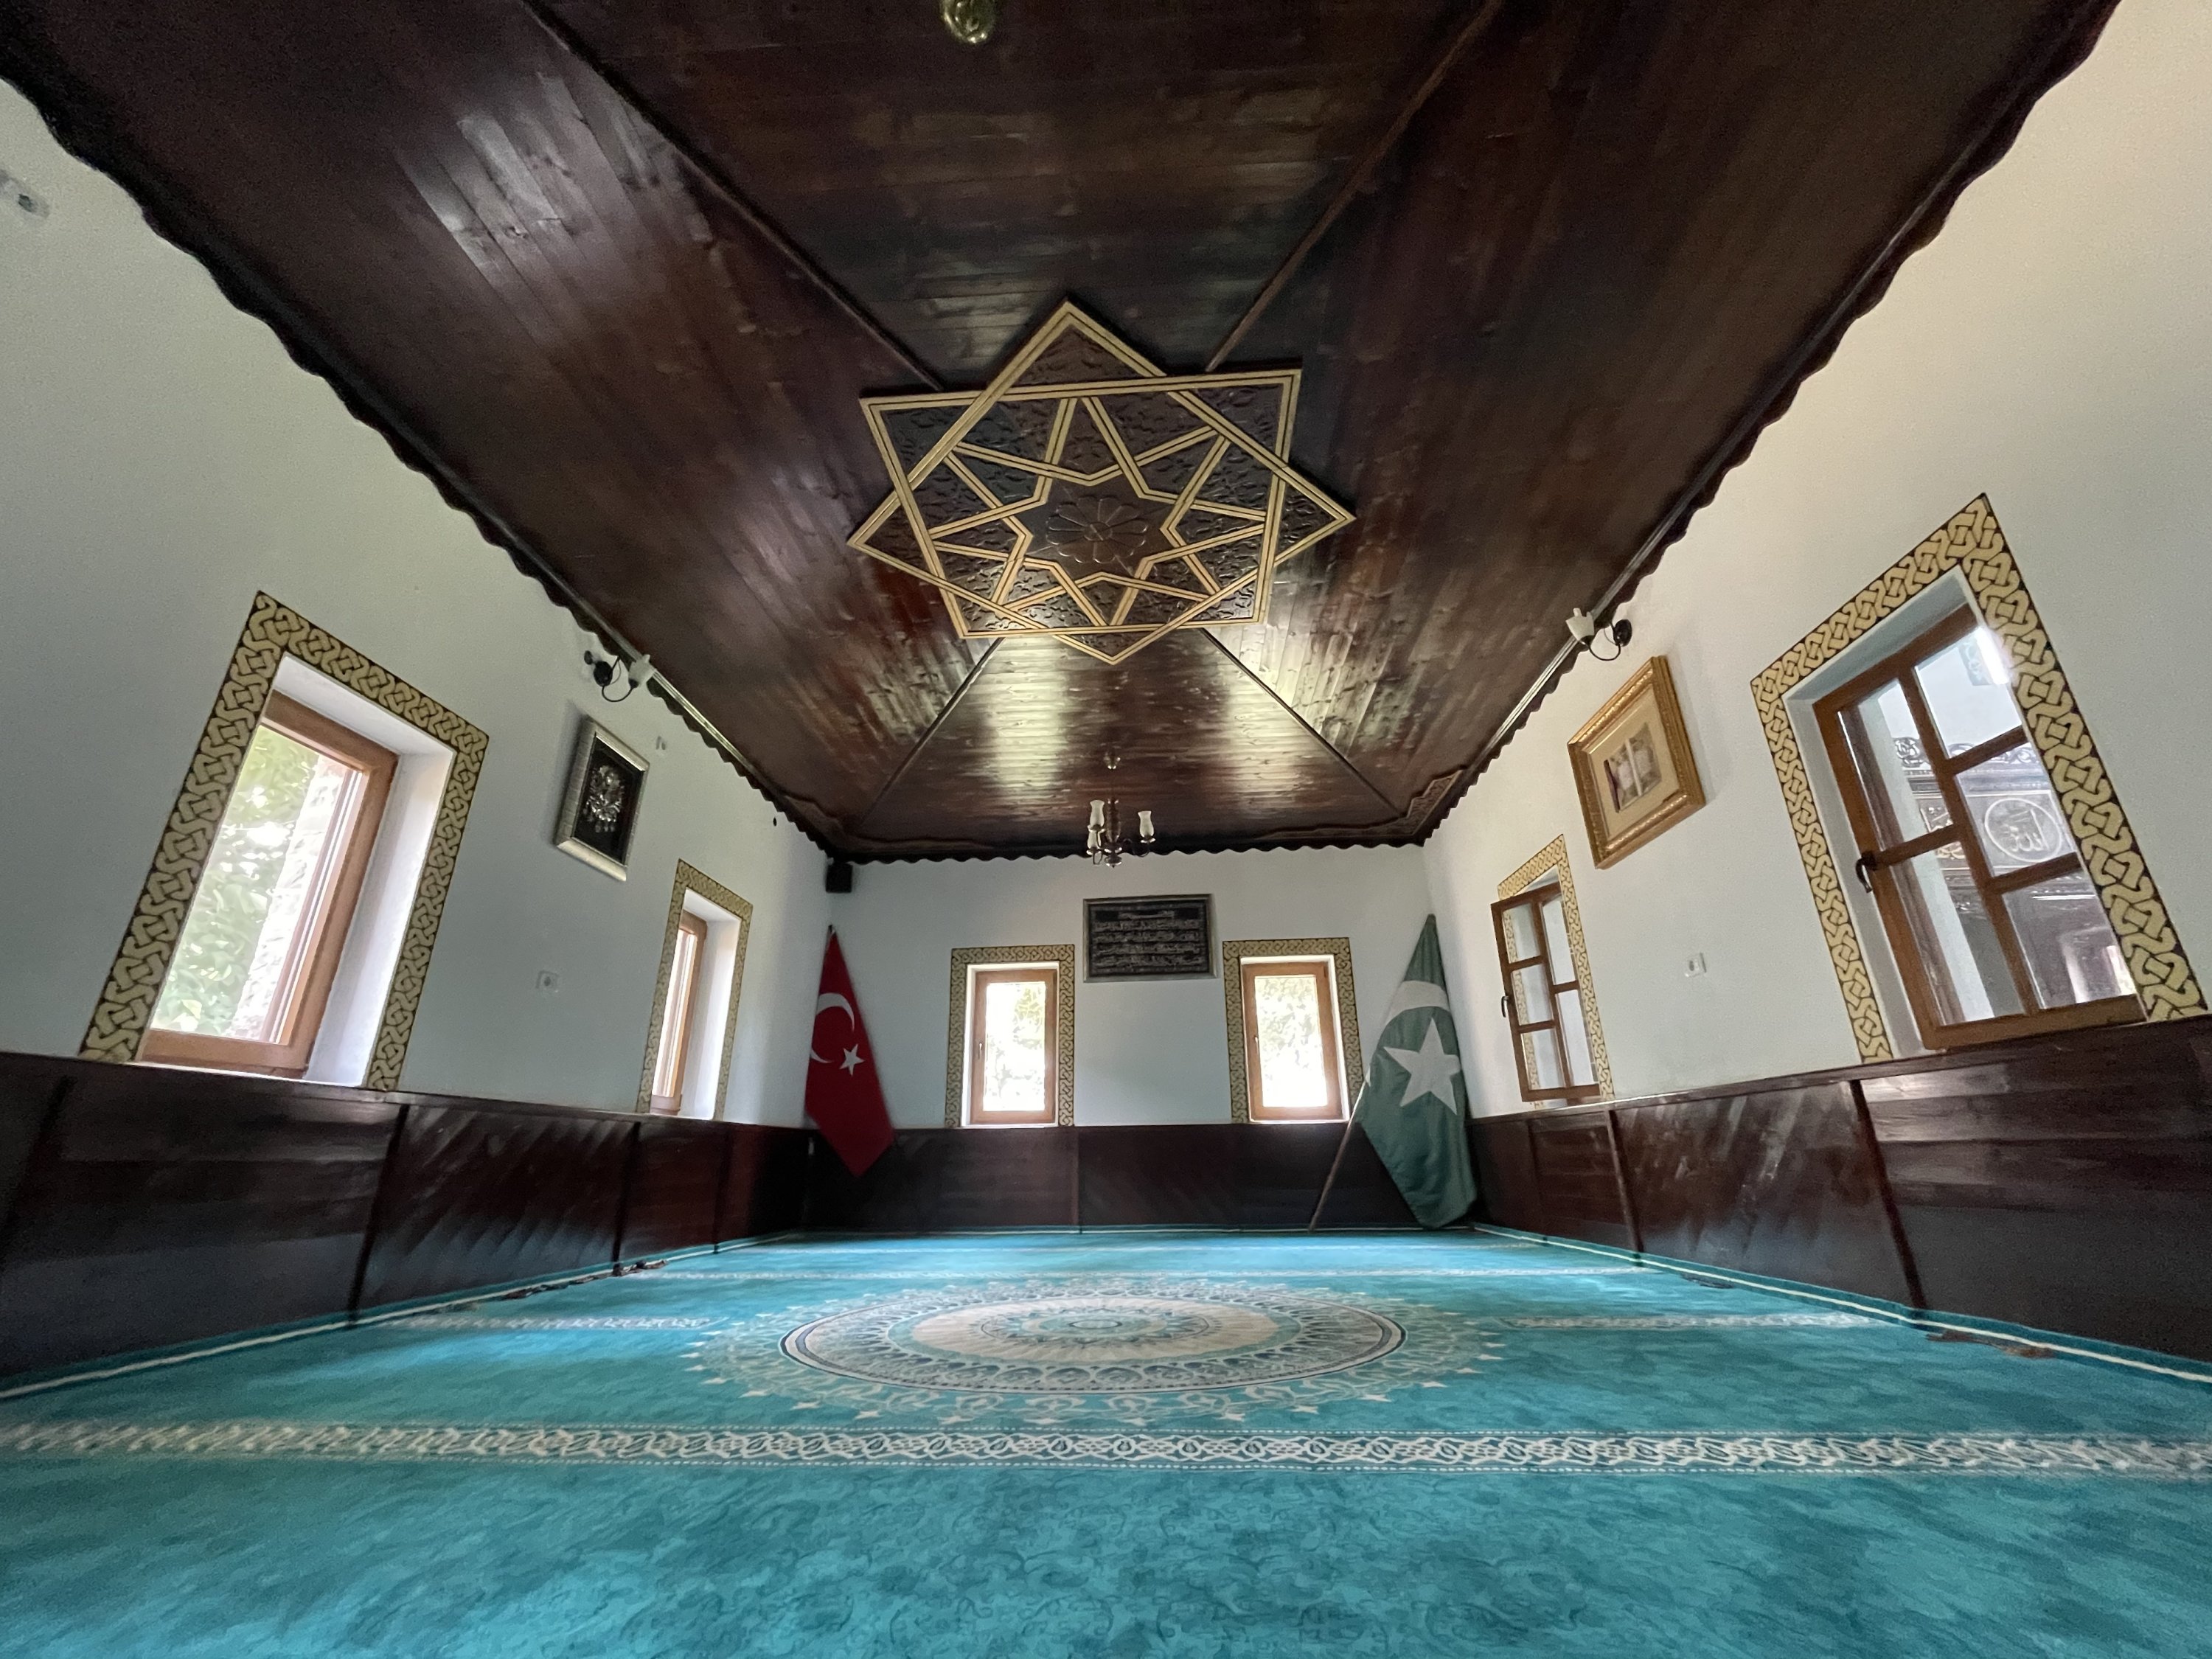 An interior view from the Nizam Mosque, Montenegro, June 22, 2022. (AA) 